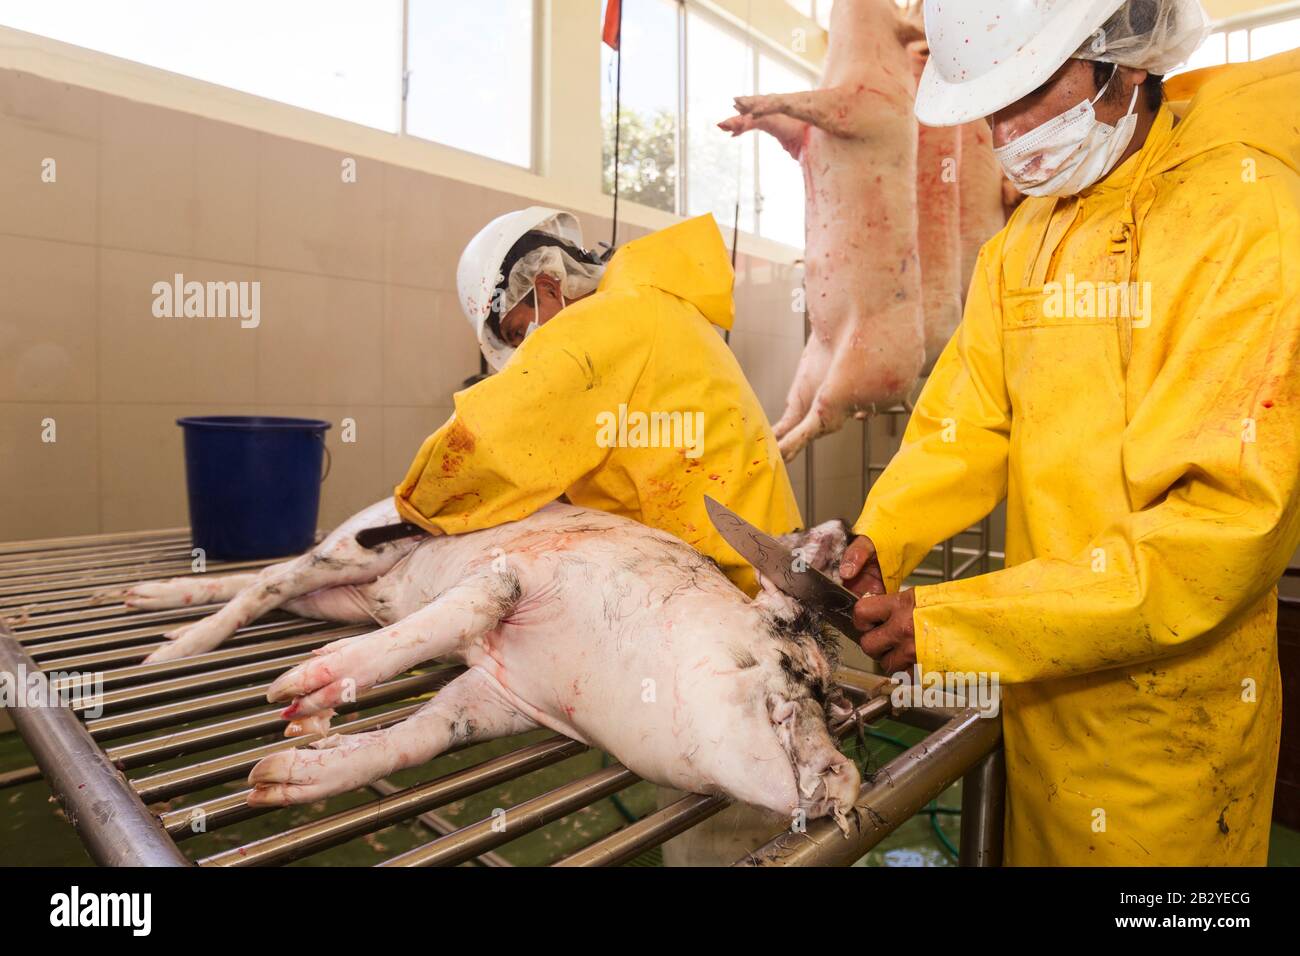 Slaughterhouse Employee Performing Hair Removal From Pork Carcass Using A Rubbing Knife Stock Photo